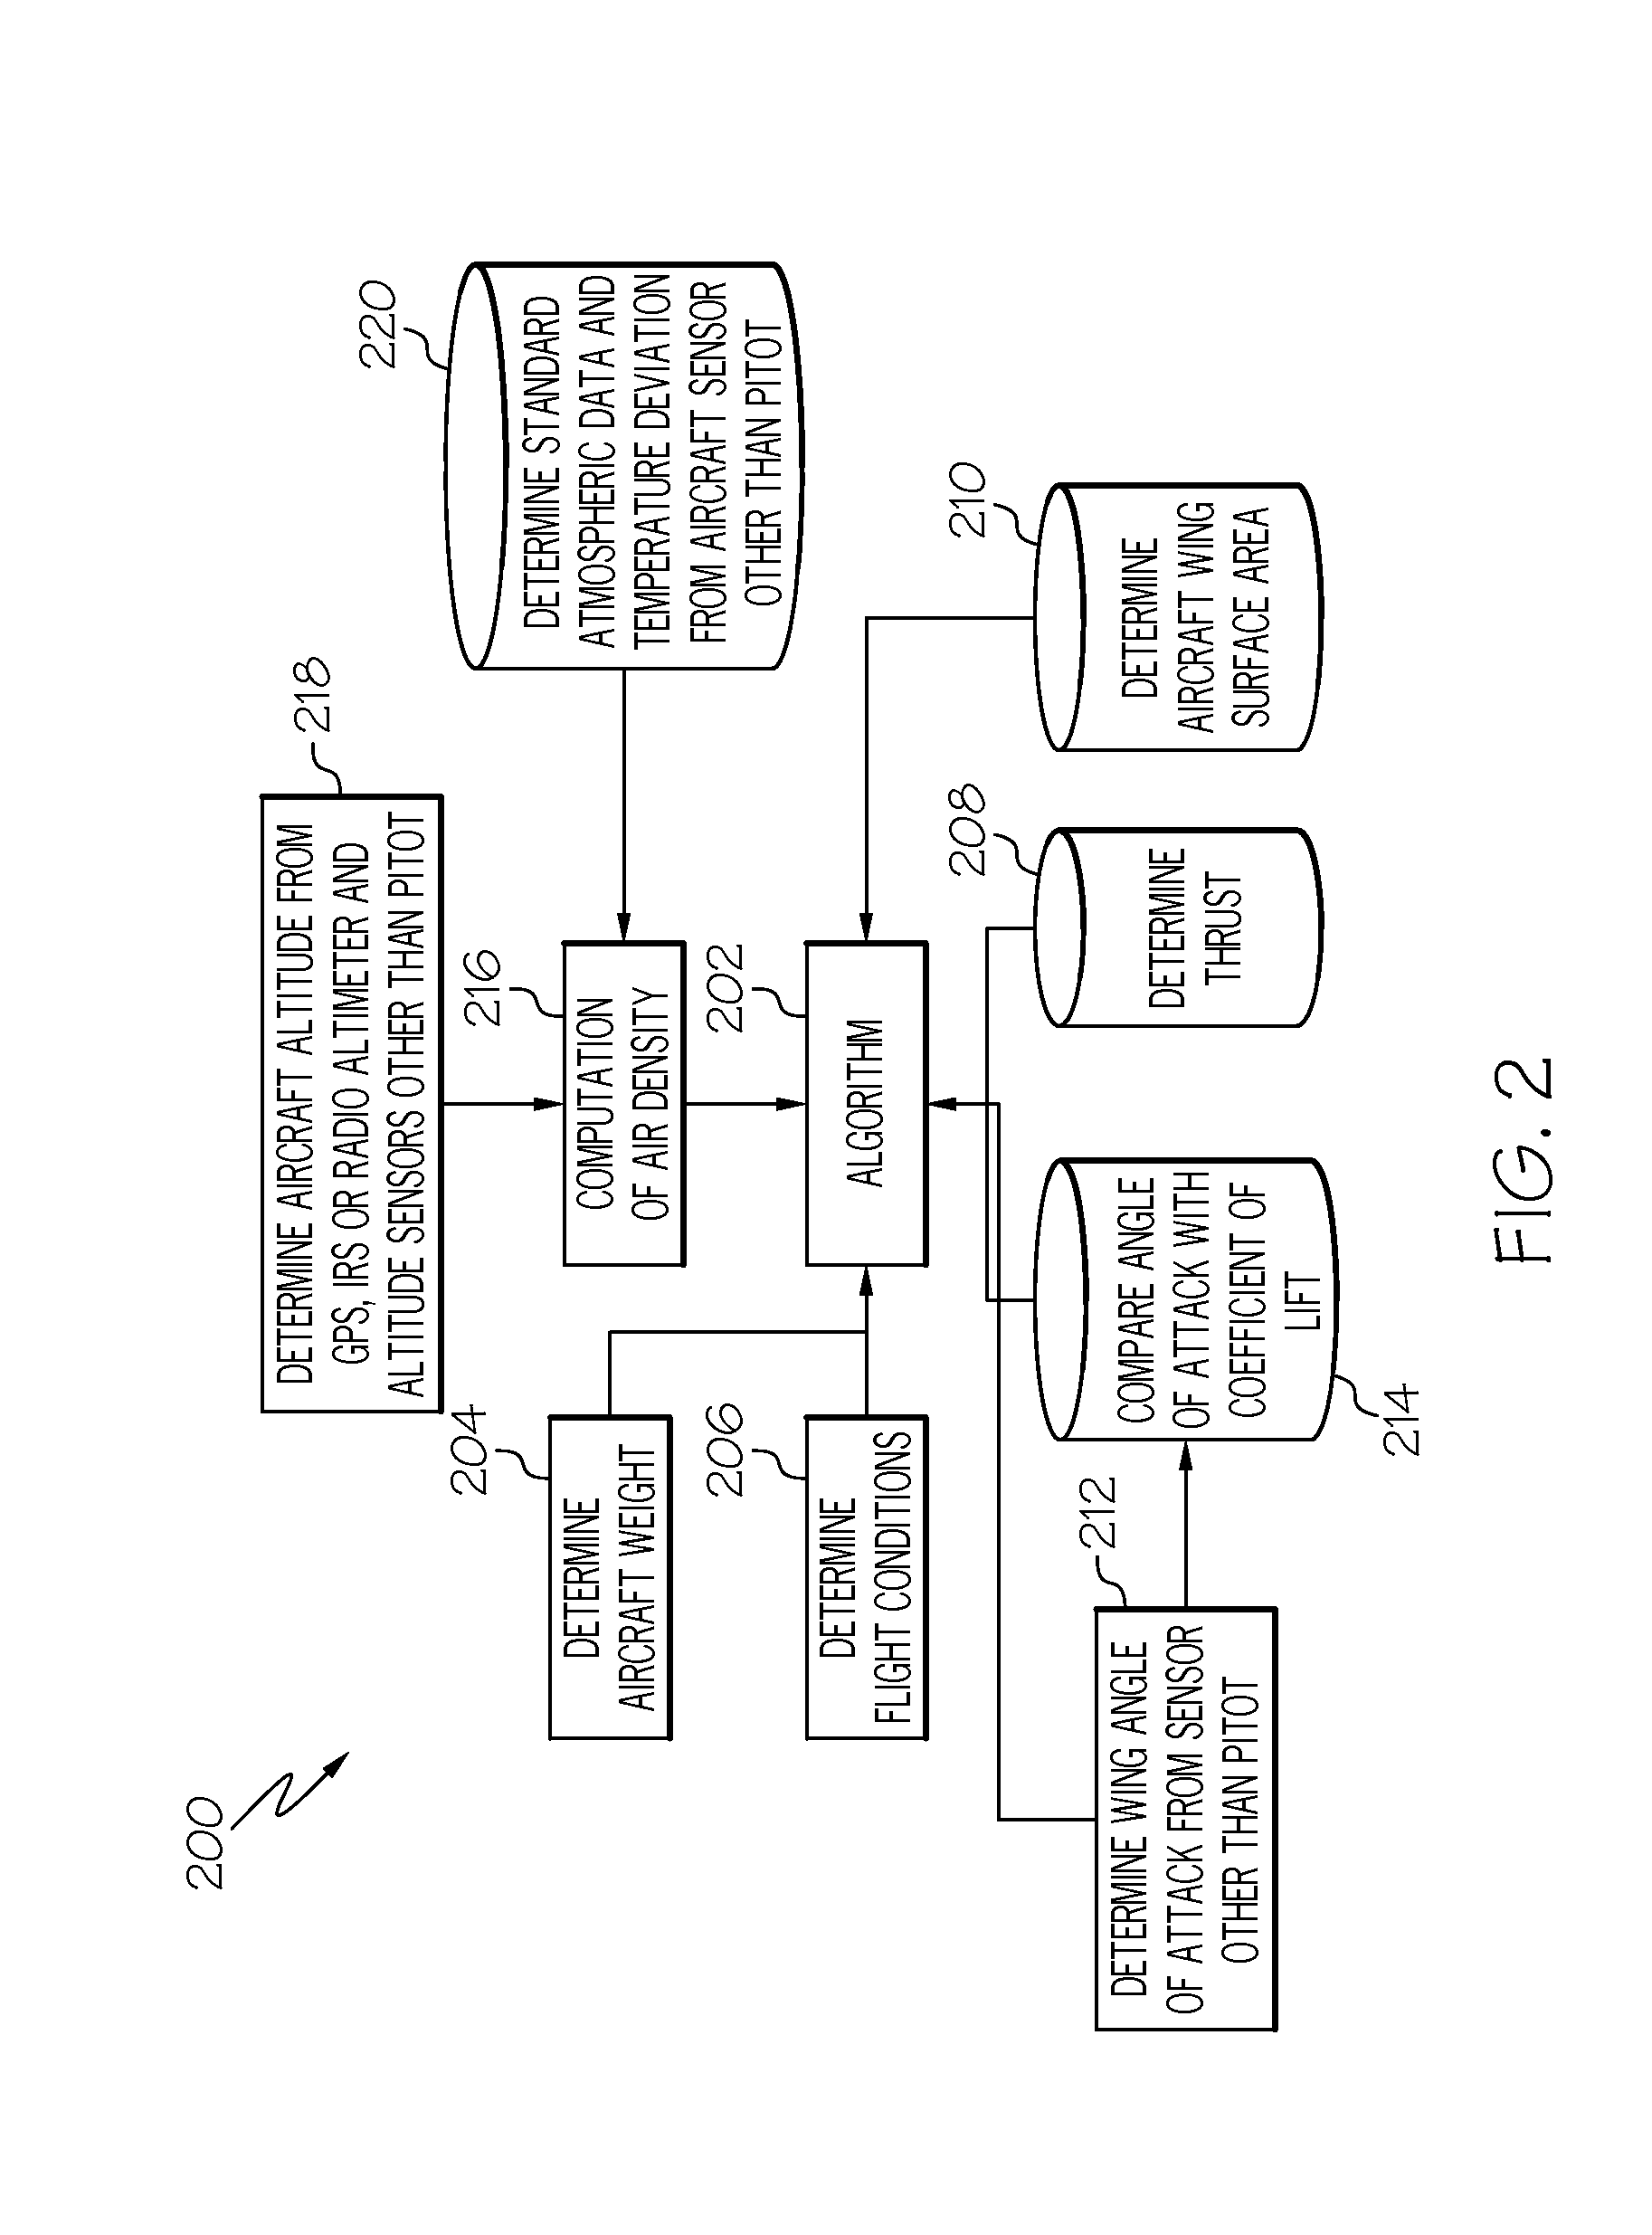 System and method for computing MACH number and true airspeed